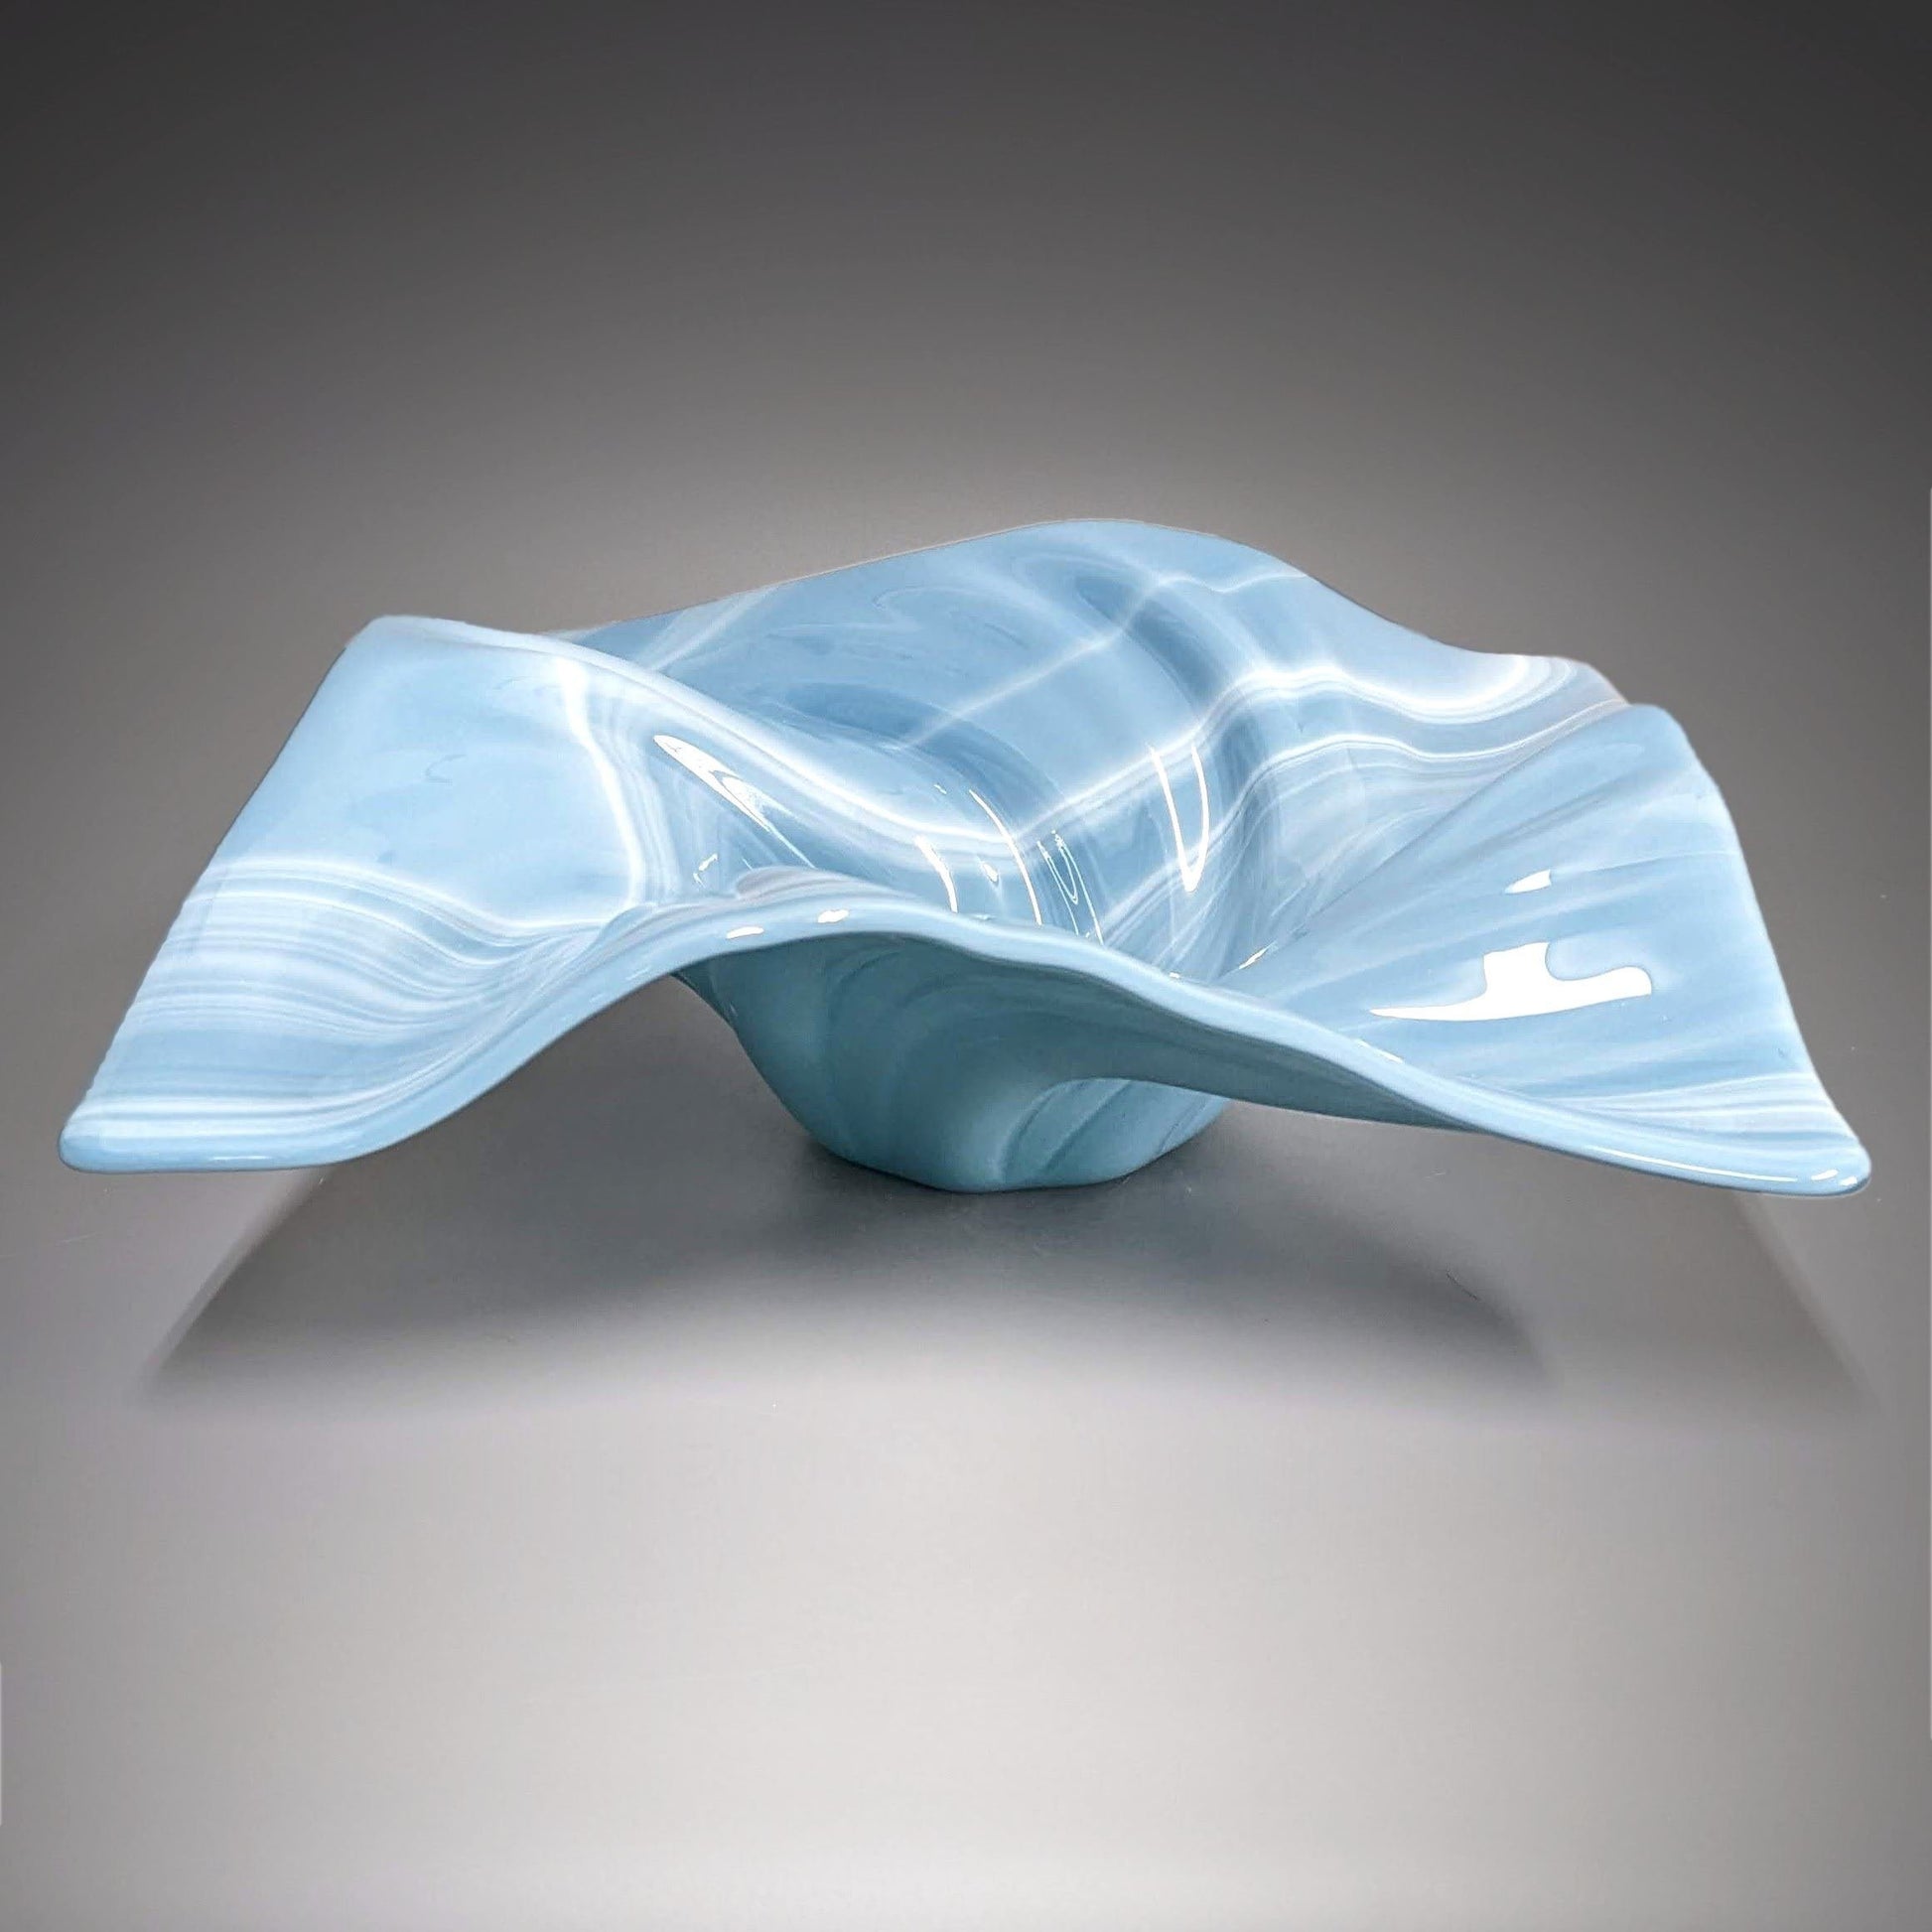 Glass Art Wave Bowl in Gray Blue and White | Handcrafted in the USA